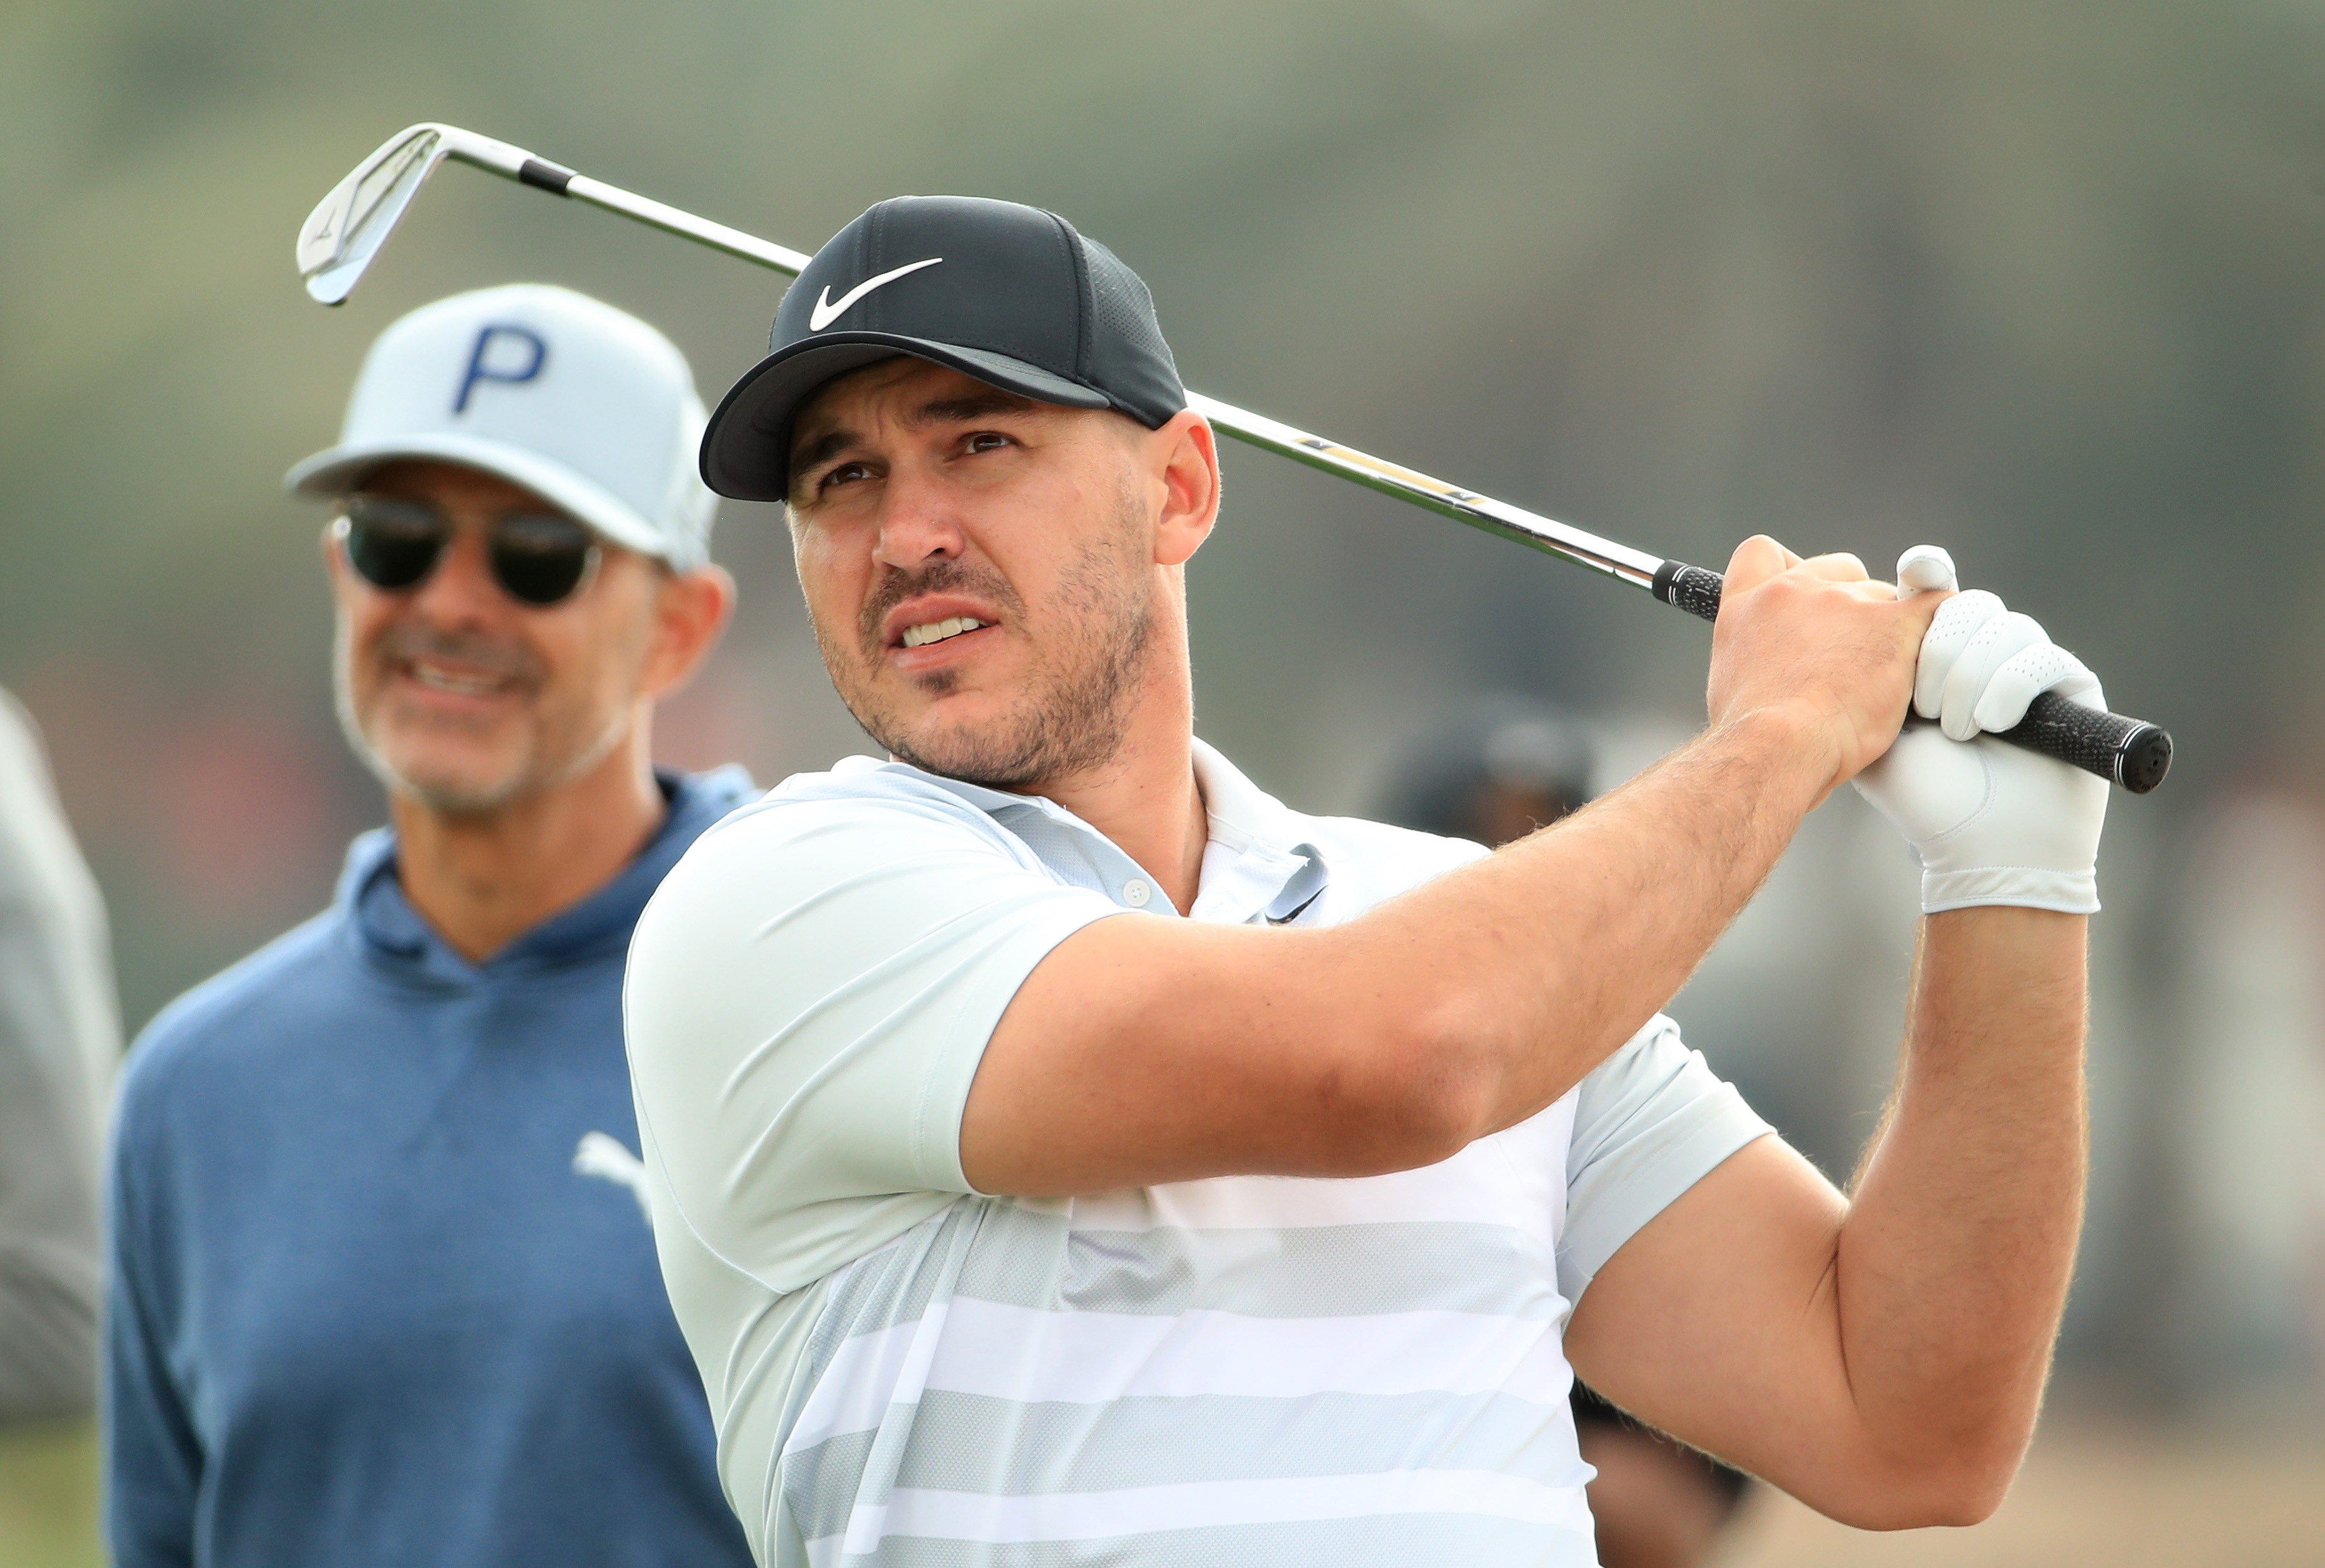 Brooks Koepka Credits Claude Harmon, Son of Legendary Instructor Butch Harmon, for His Swing